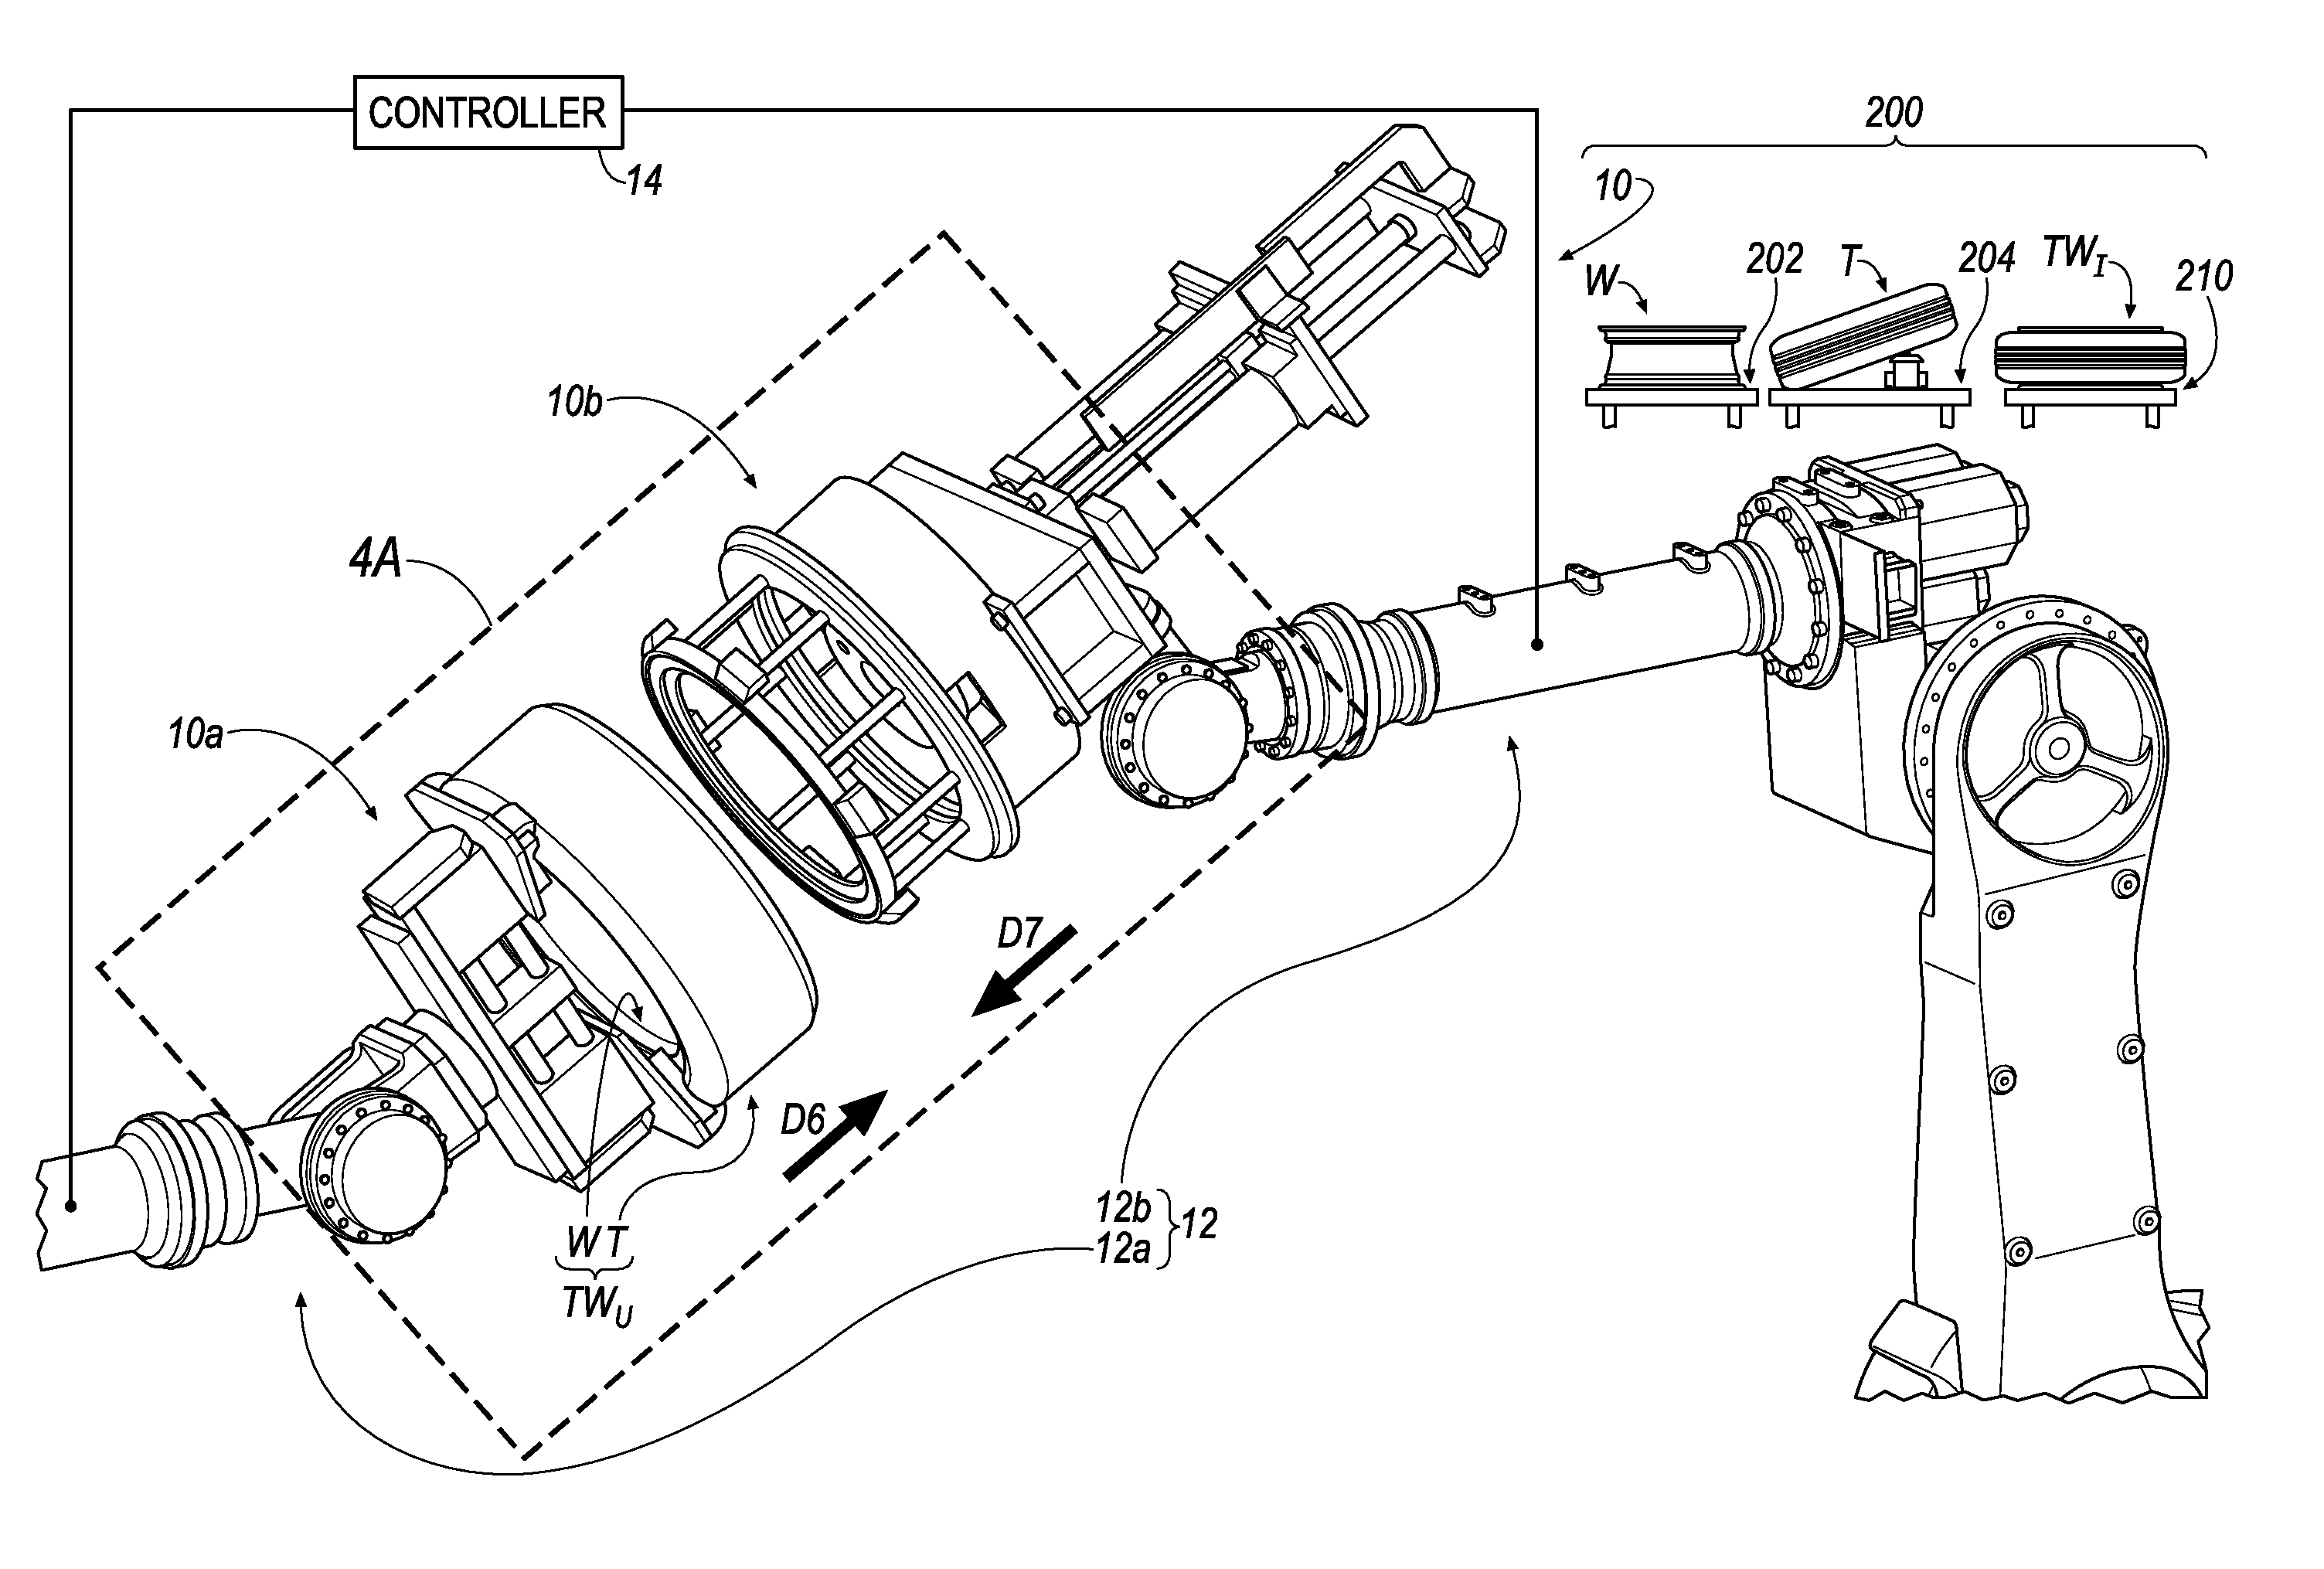 Apparatus, methods, components, and systems for assembling and/or inflating a tire-wheel assembly